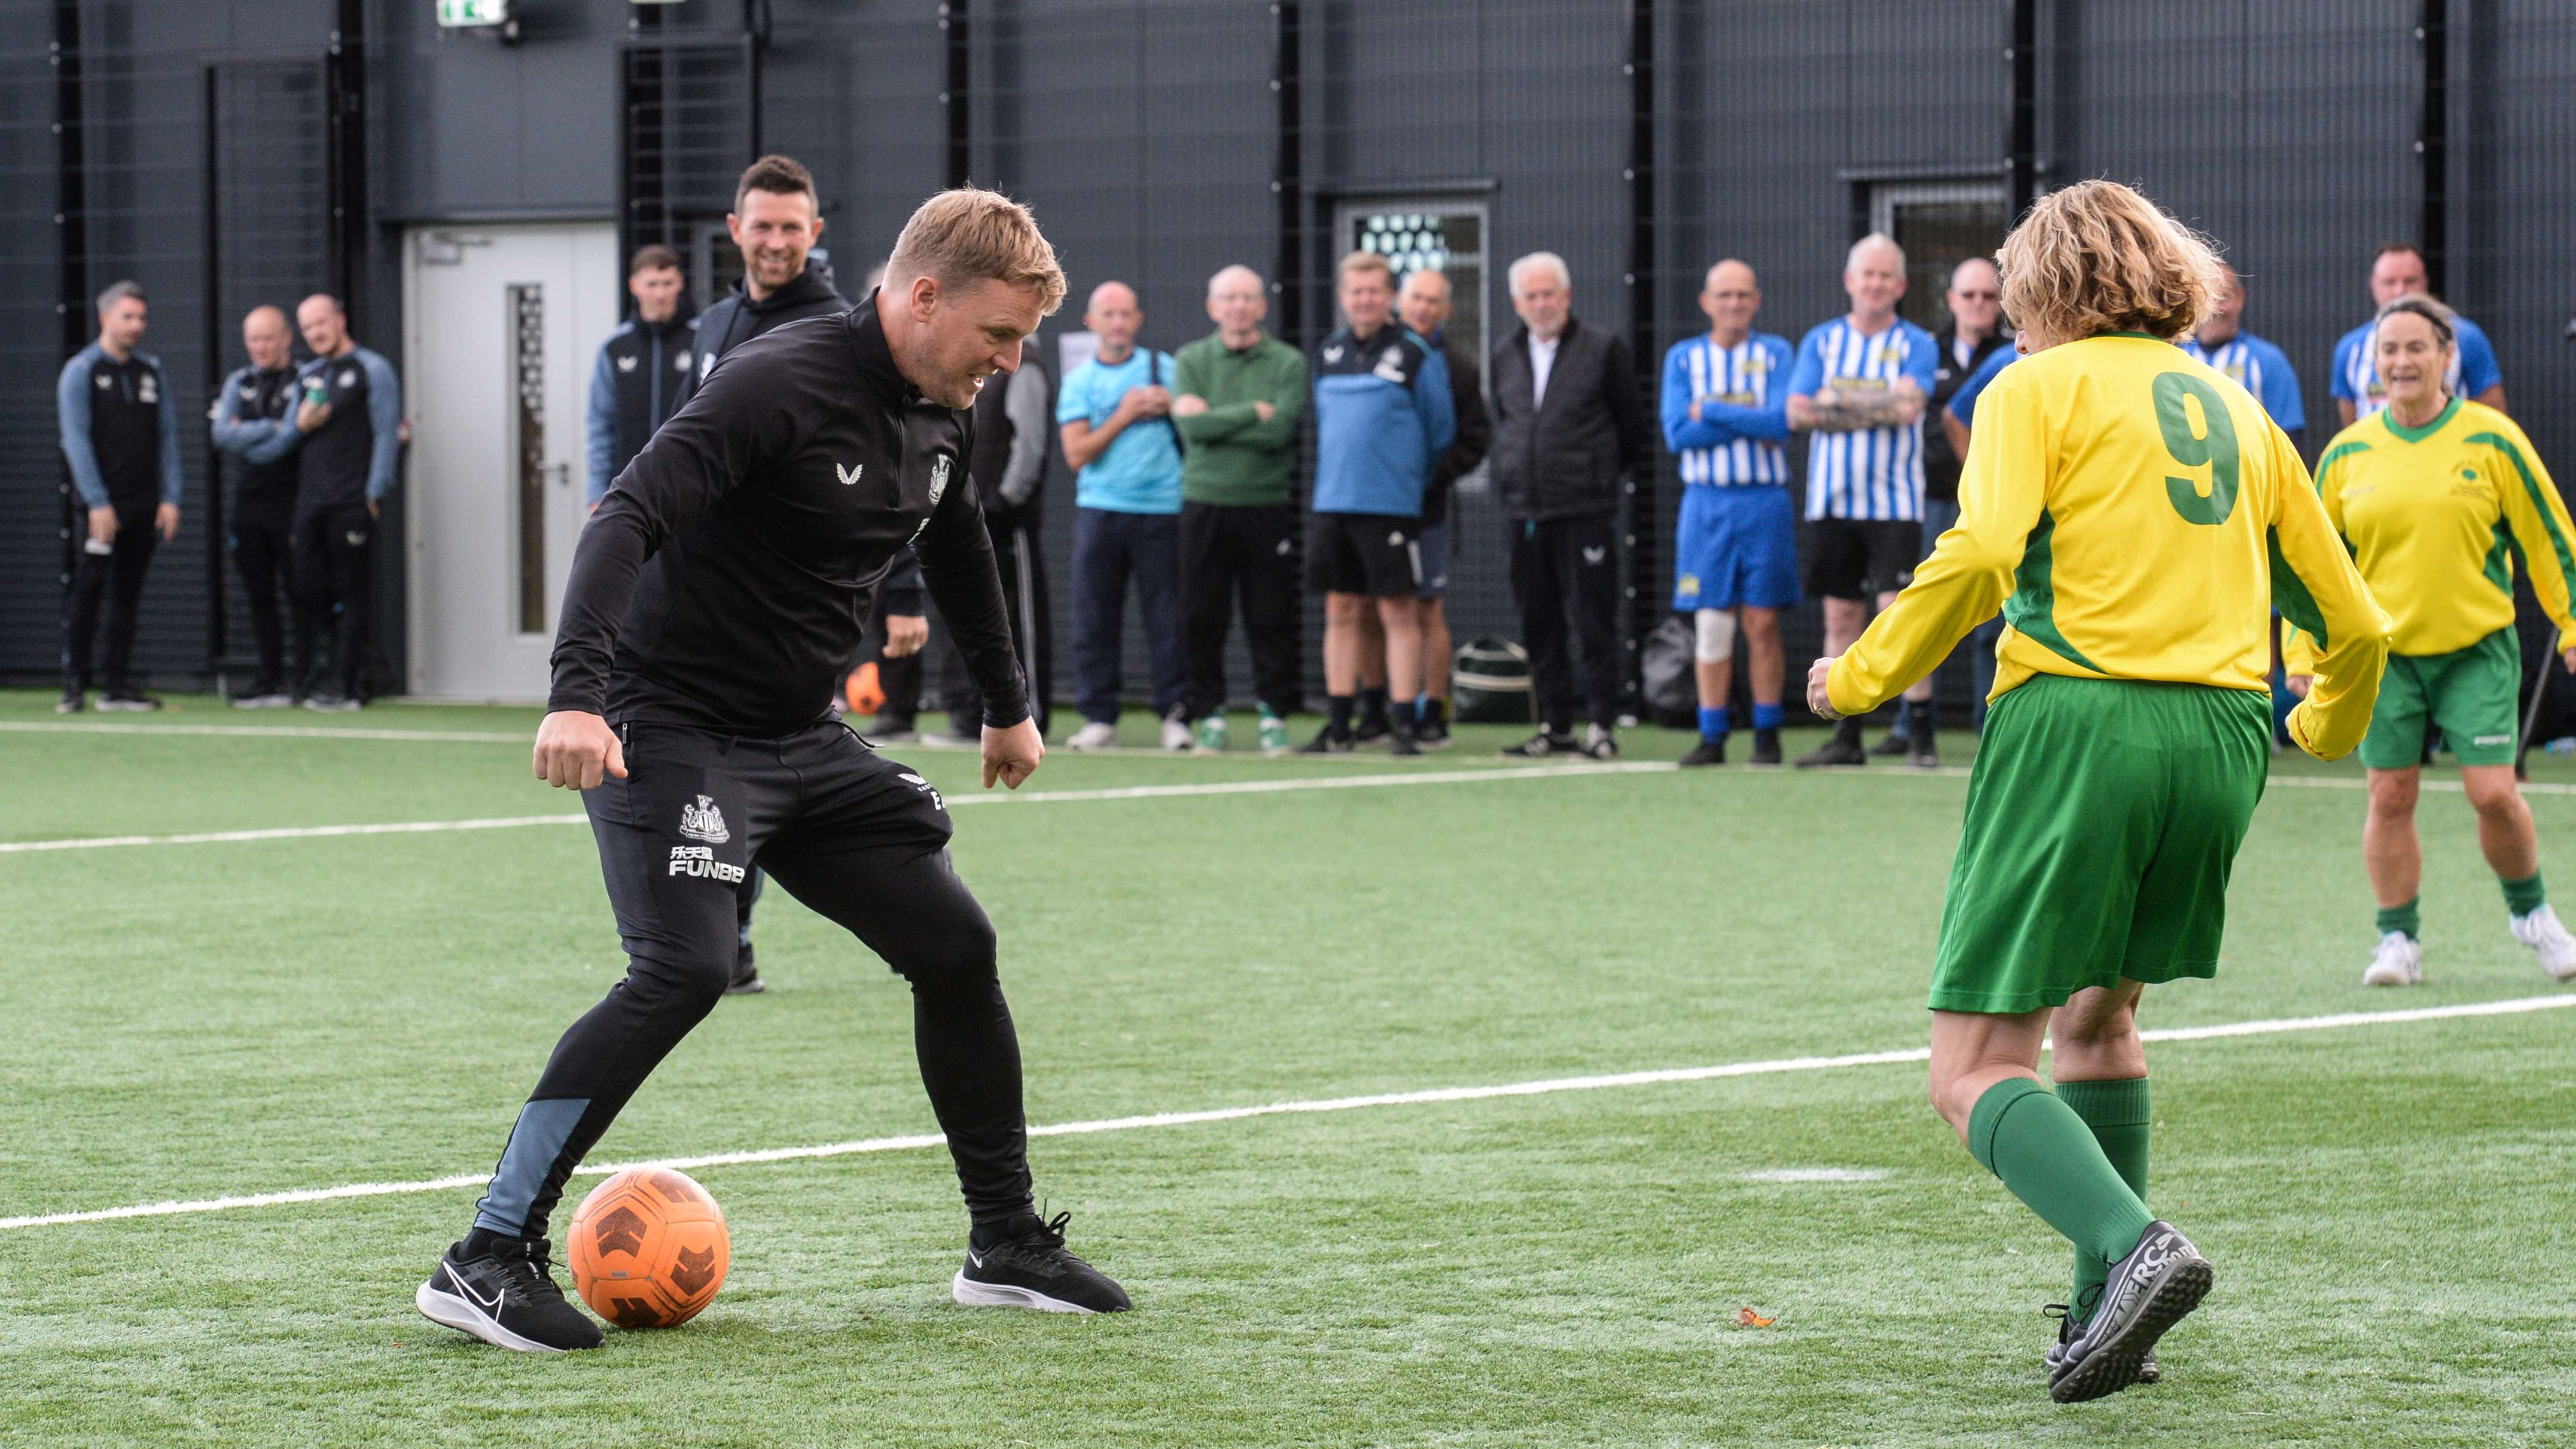 Eddie Howe surprises fans as he joins in with charity's walking football and wellbeing session